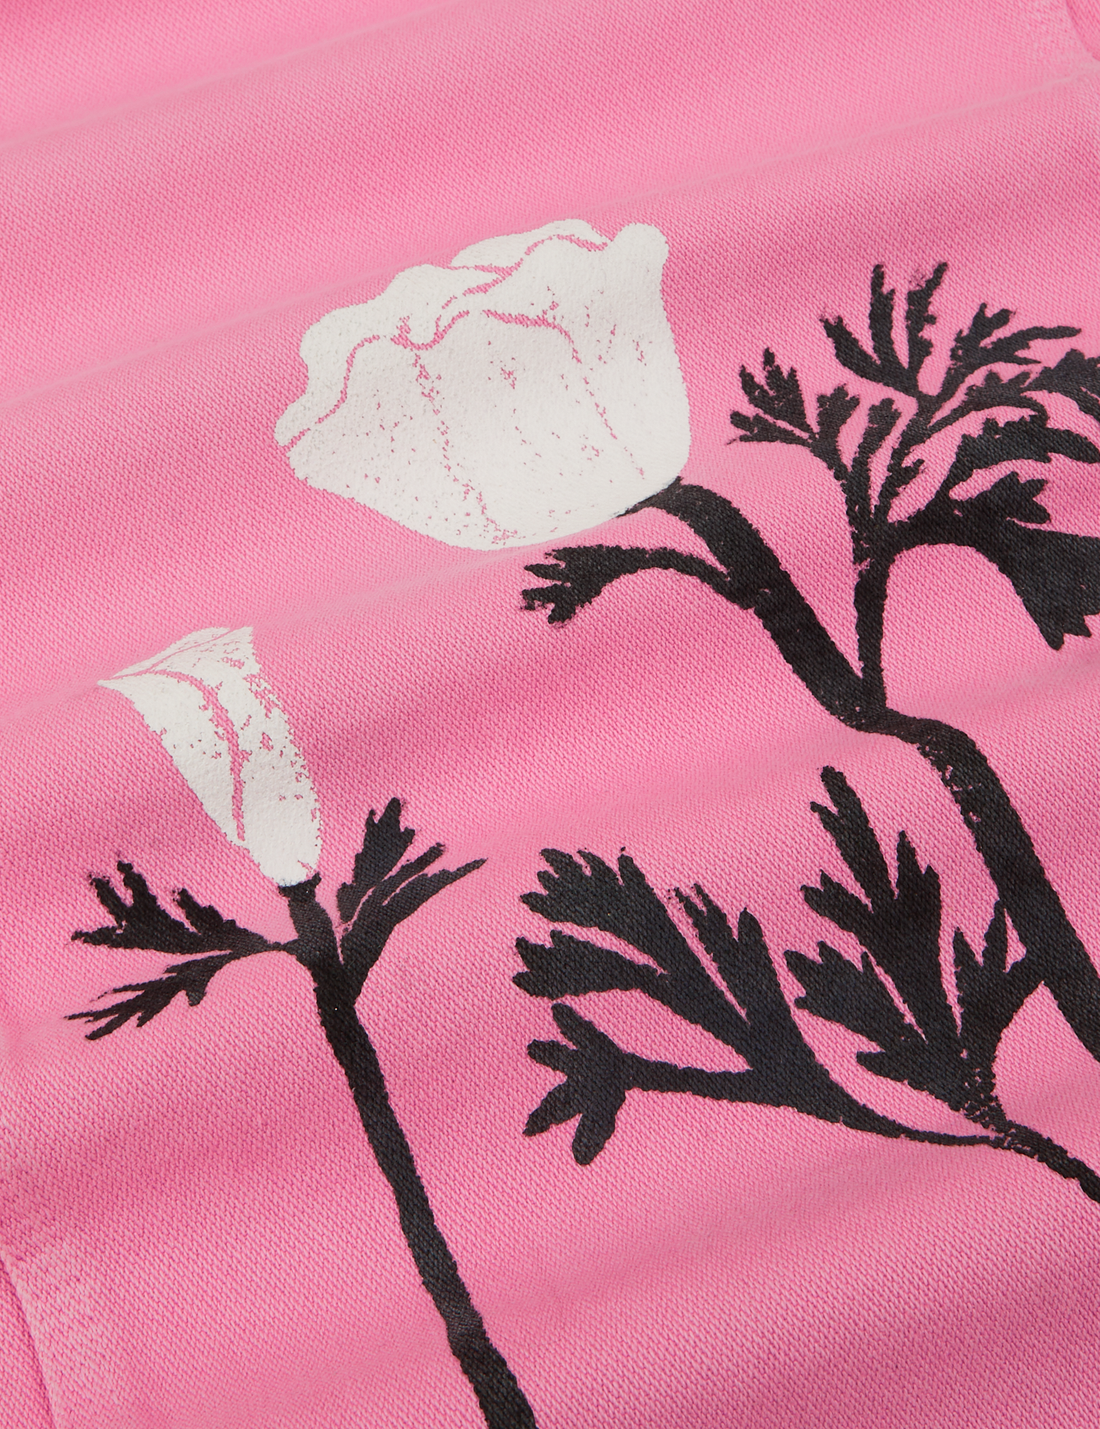 California Poppy Overalls in Bubblegum Pink fabric detail close up. Paintstamped black stems and white poppies.